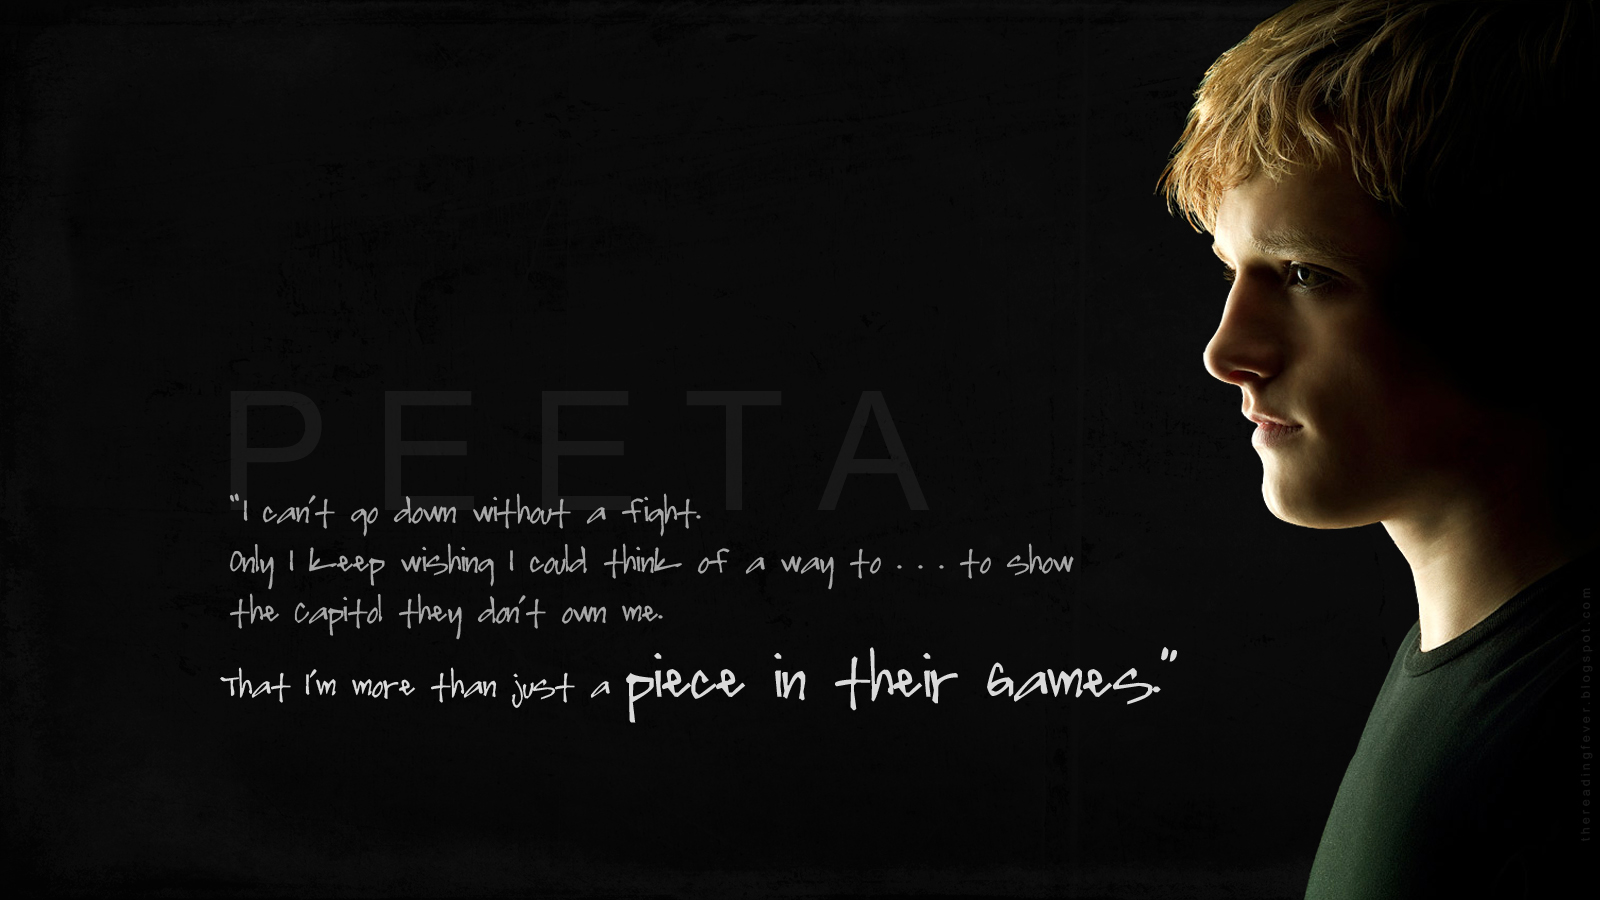 The Reading Fever Hunger Games Desktop Wallpapers Made From the